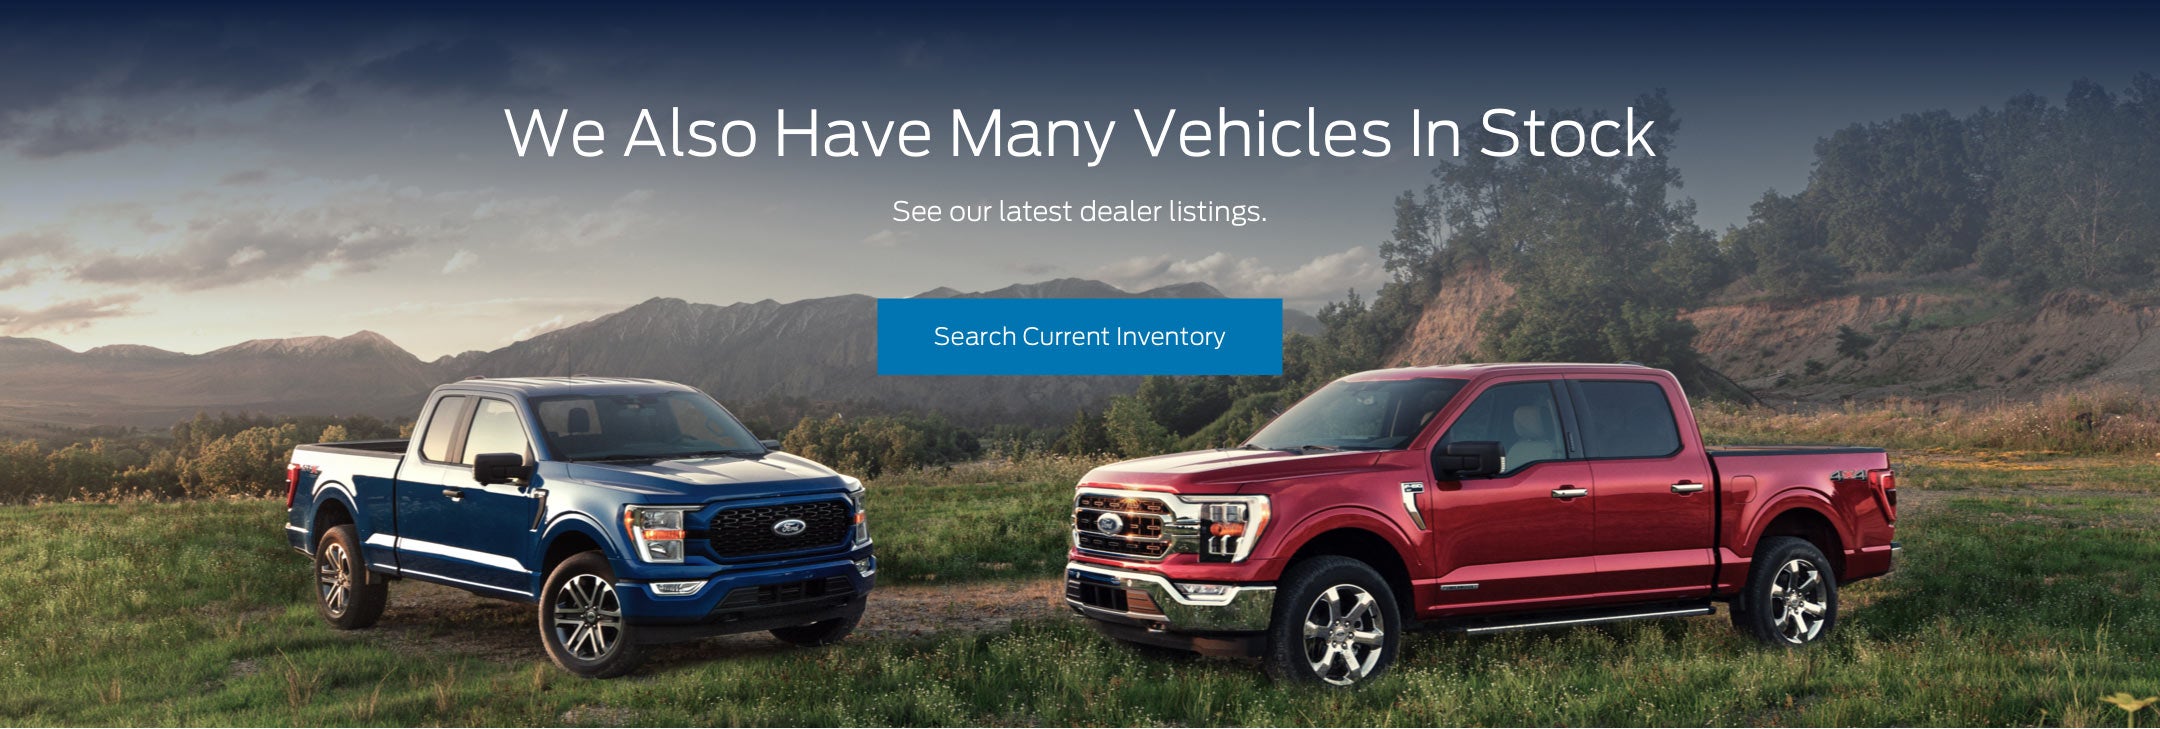 Ford vehicles in stock | Kory Hooks Ford in Bowie TX